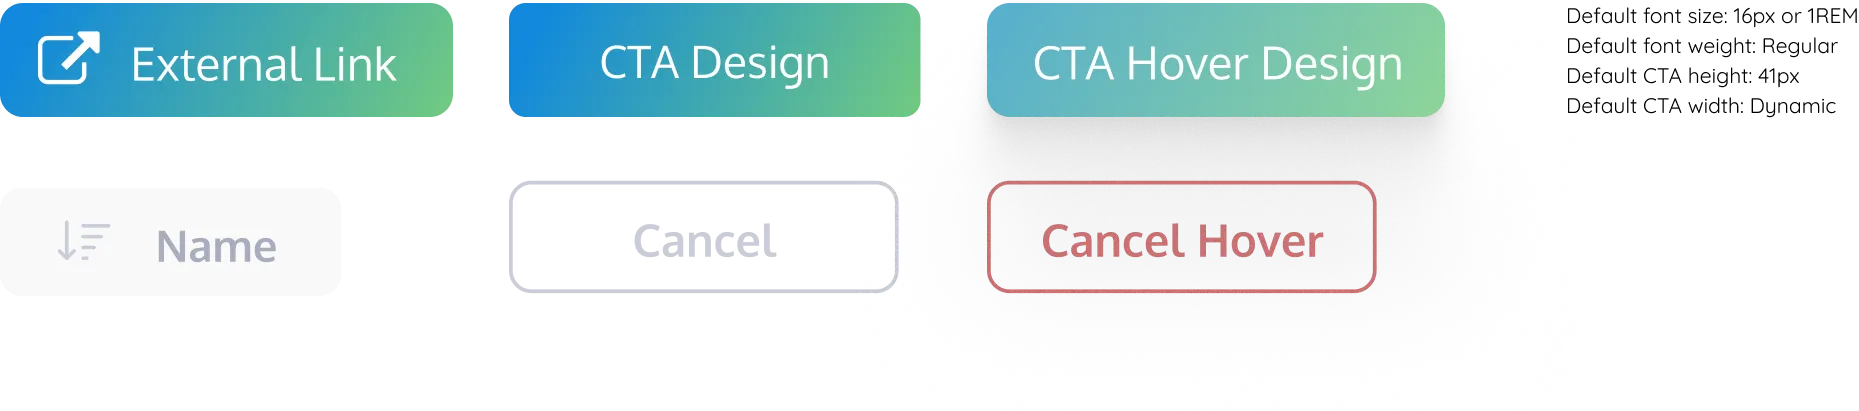 Design system CTAs and buttons